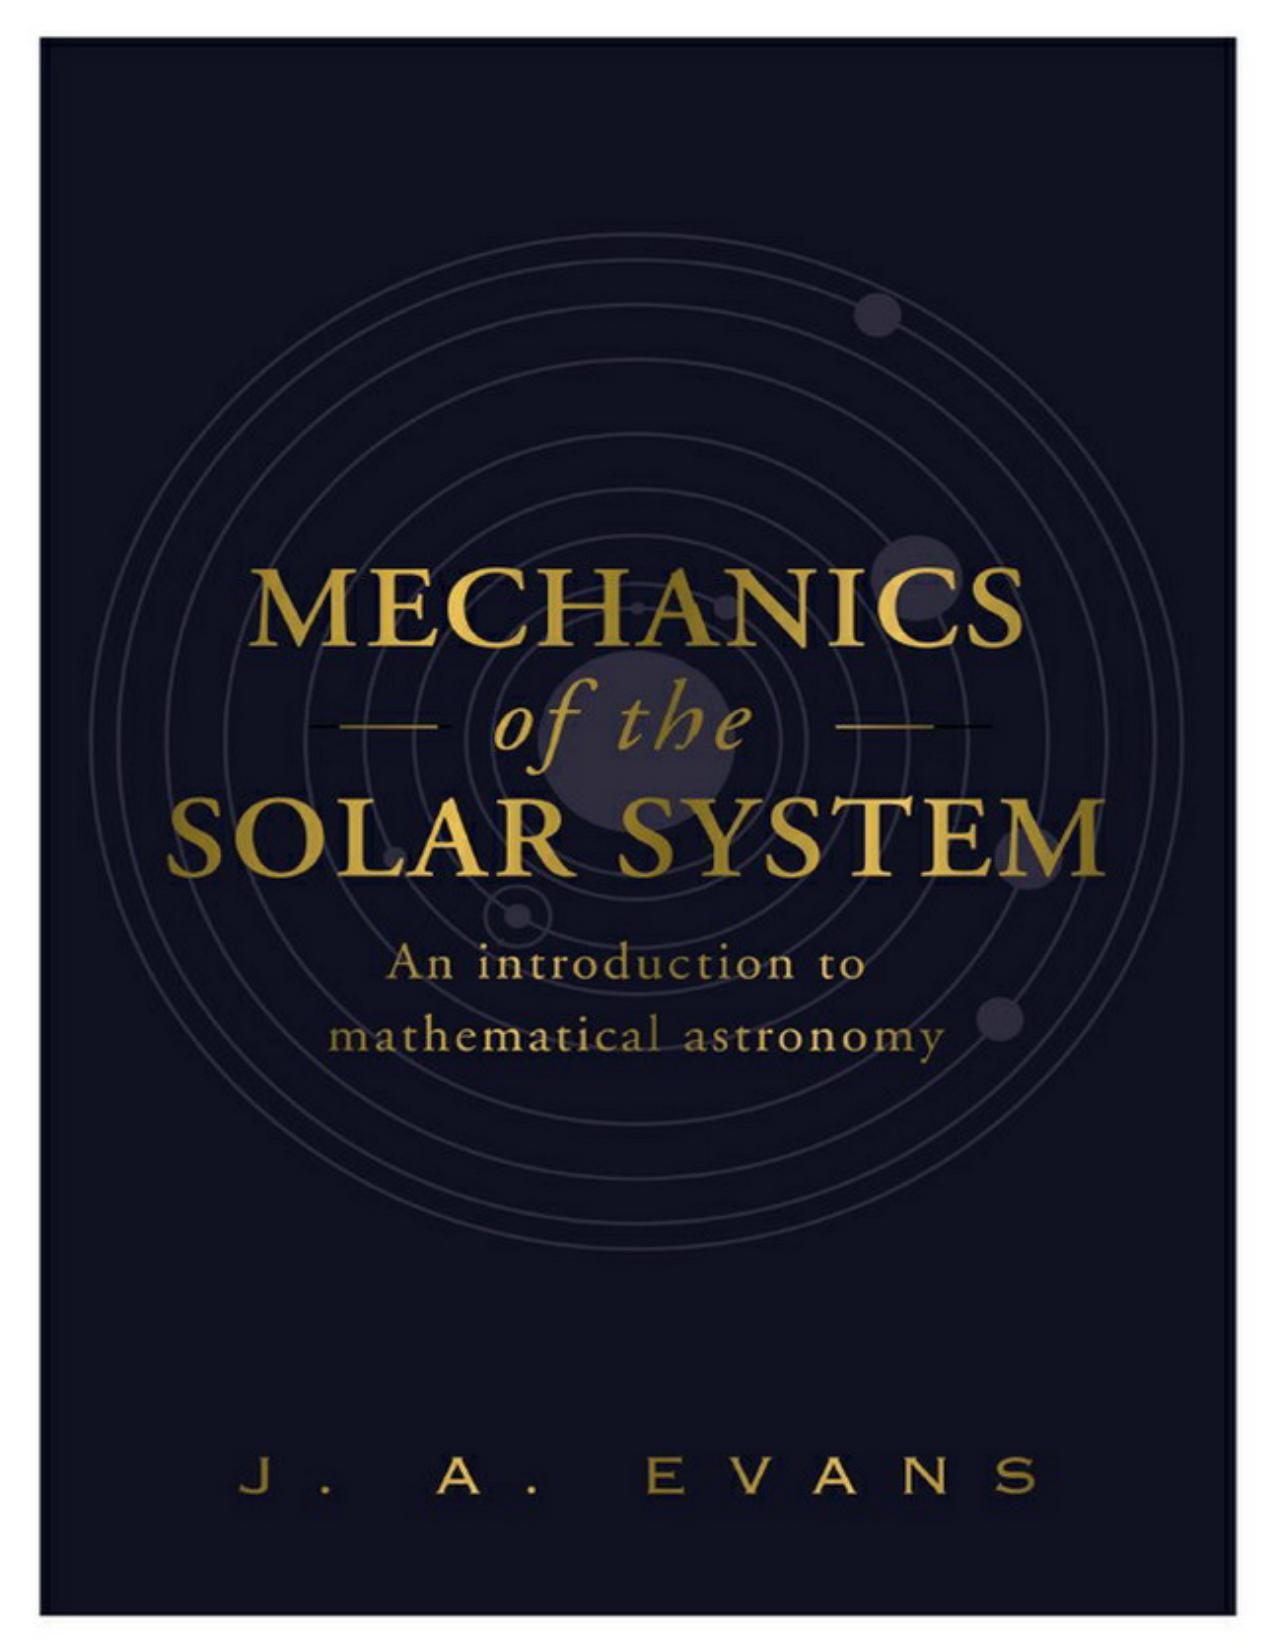 Mechanics of the Solar System by Evans J. A.;